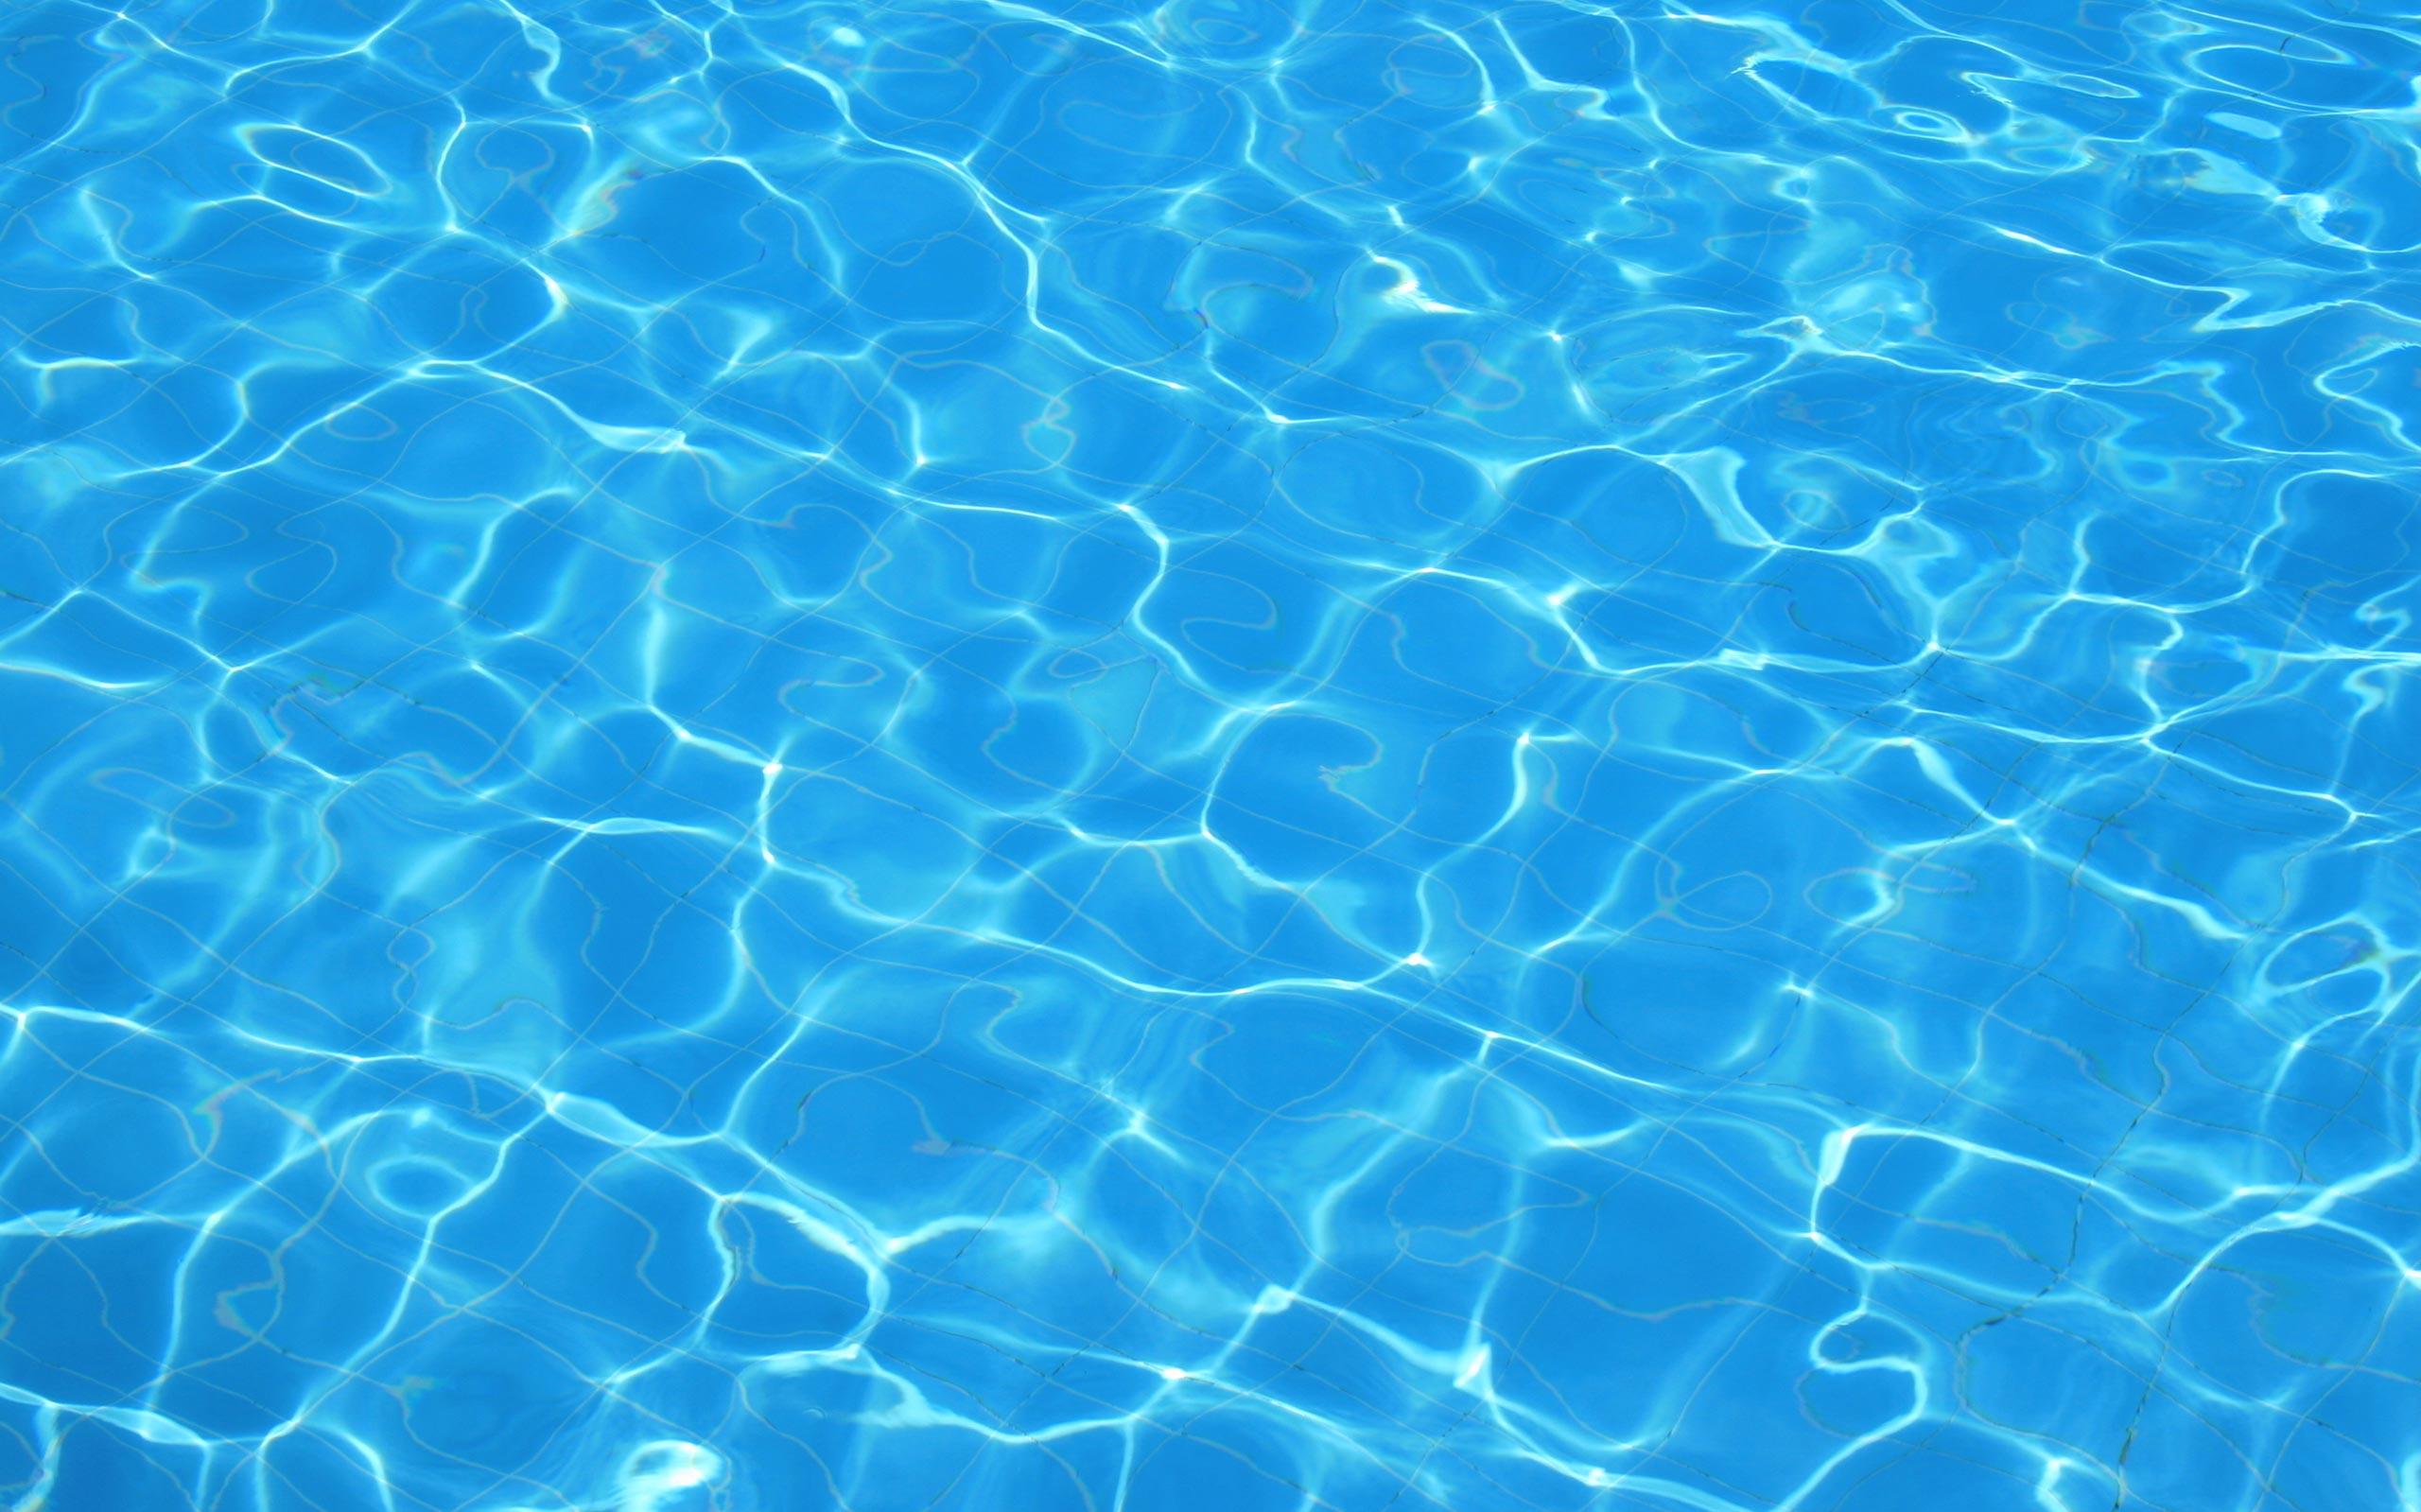 Free download Water wallpaper 2560x1600 70827 [2560x1600] for your